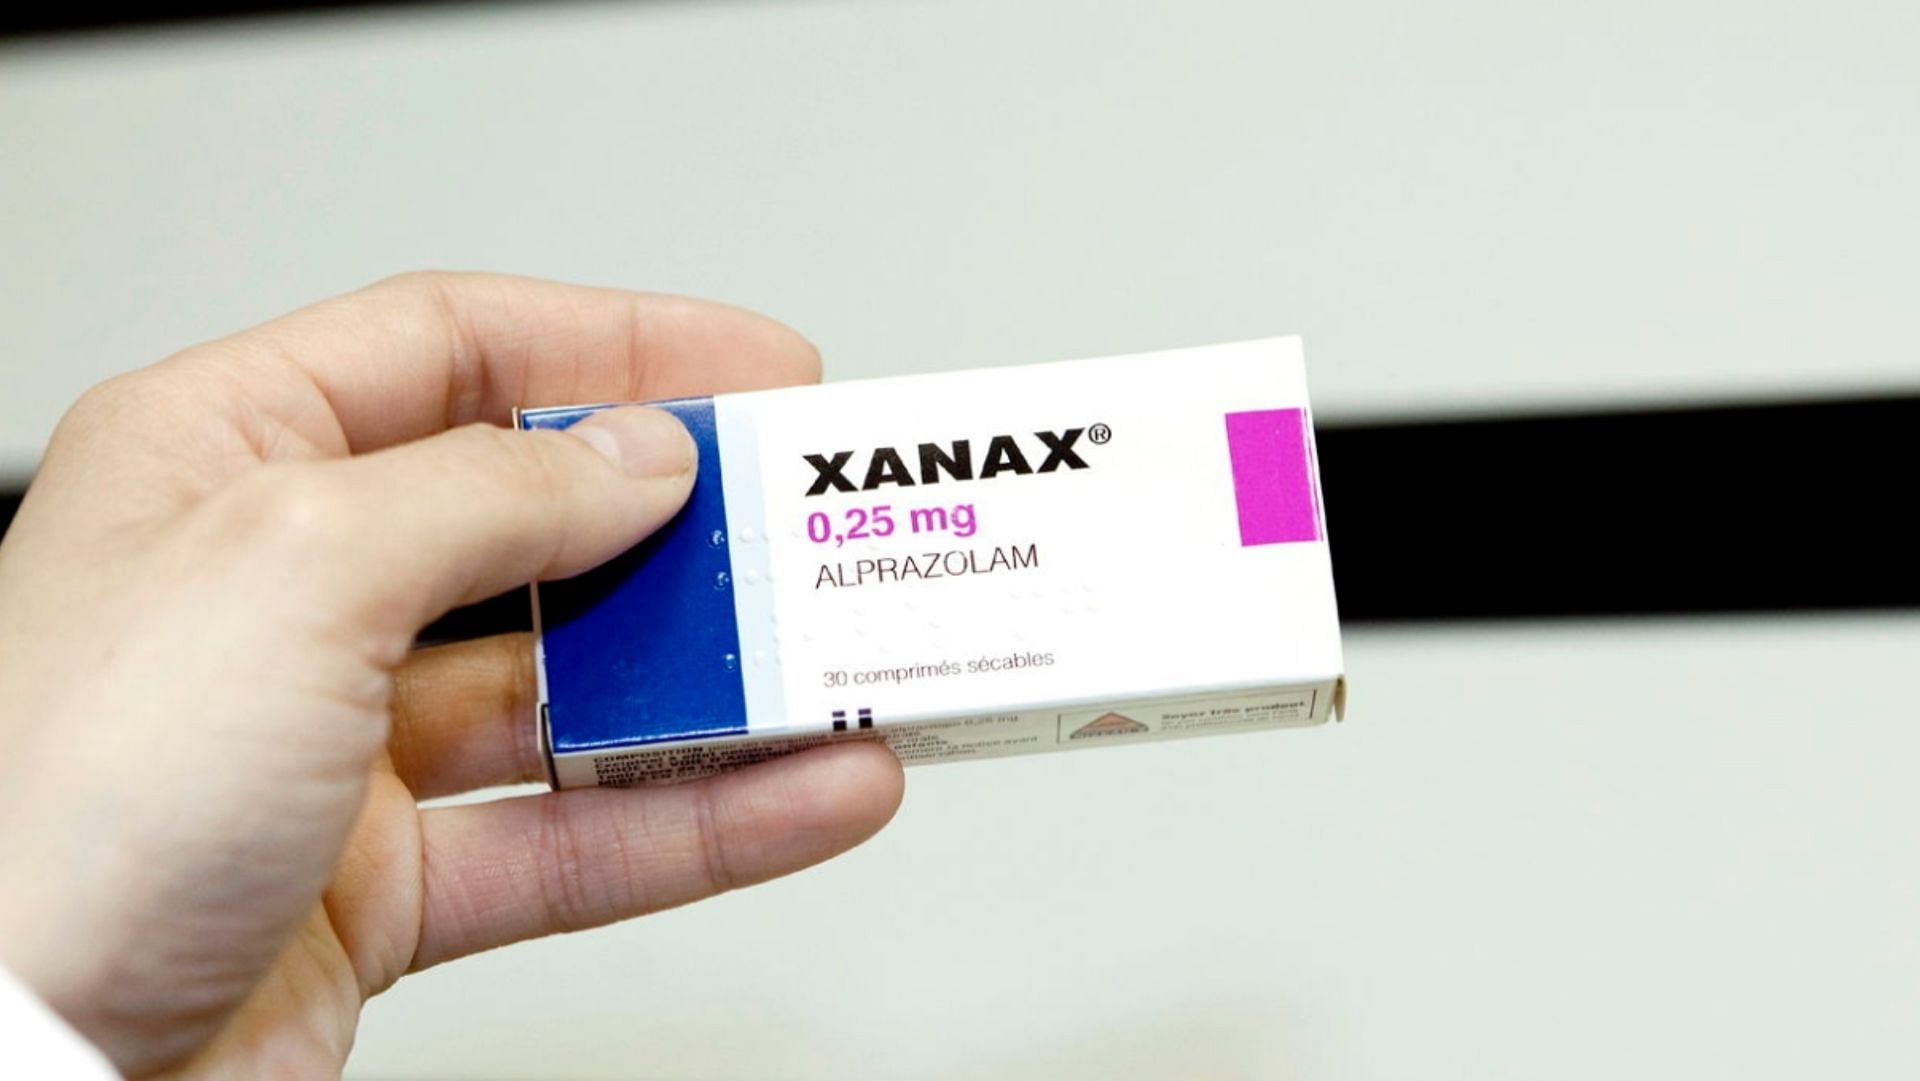 Xanax is used to treat panic disorders and anxiety. (Image via Getty Images)